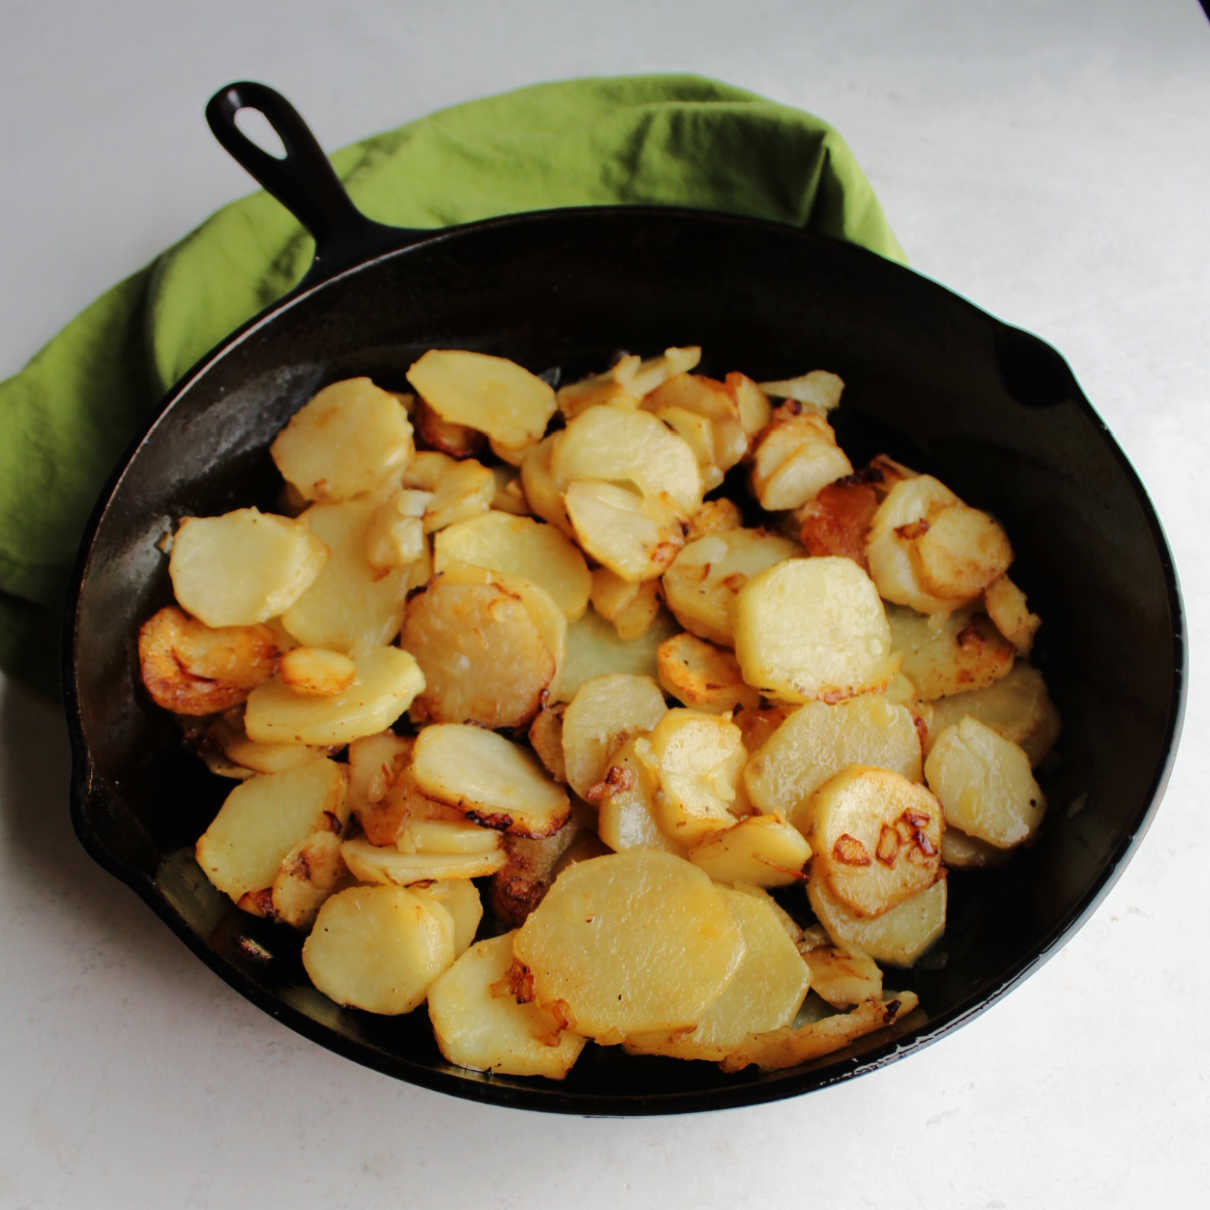 Large cast iron skillet filled with fried sliced potatoes.